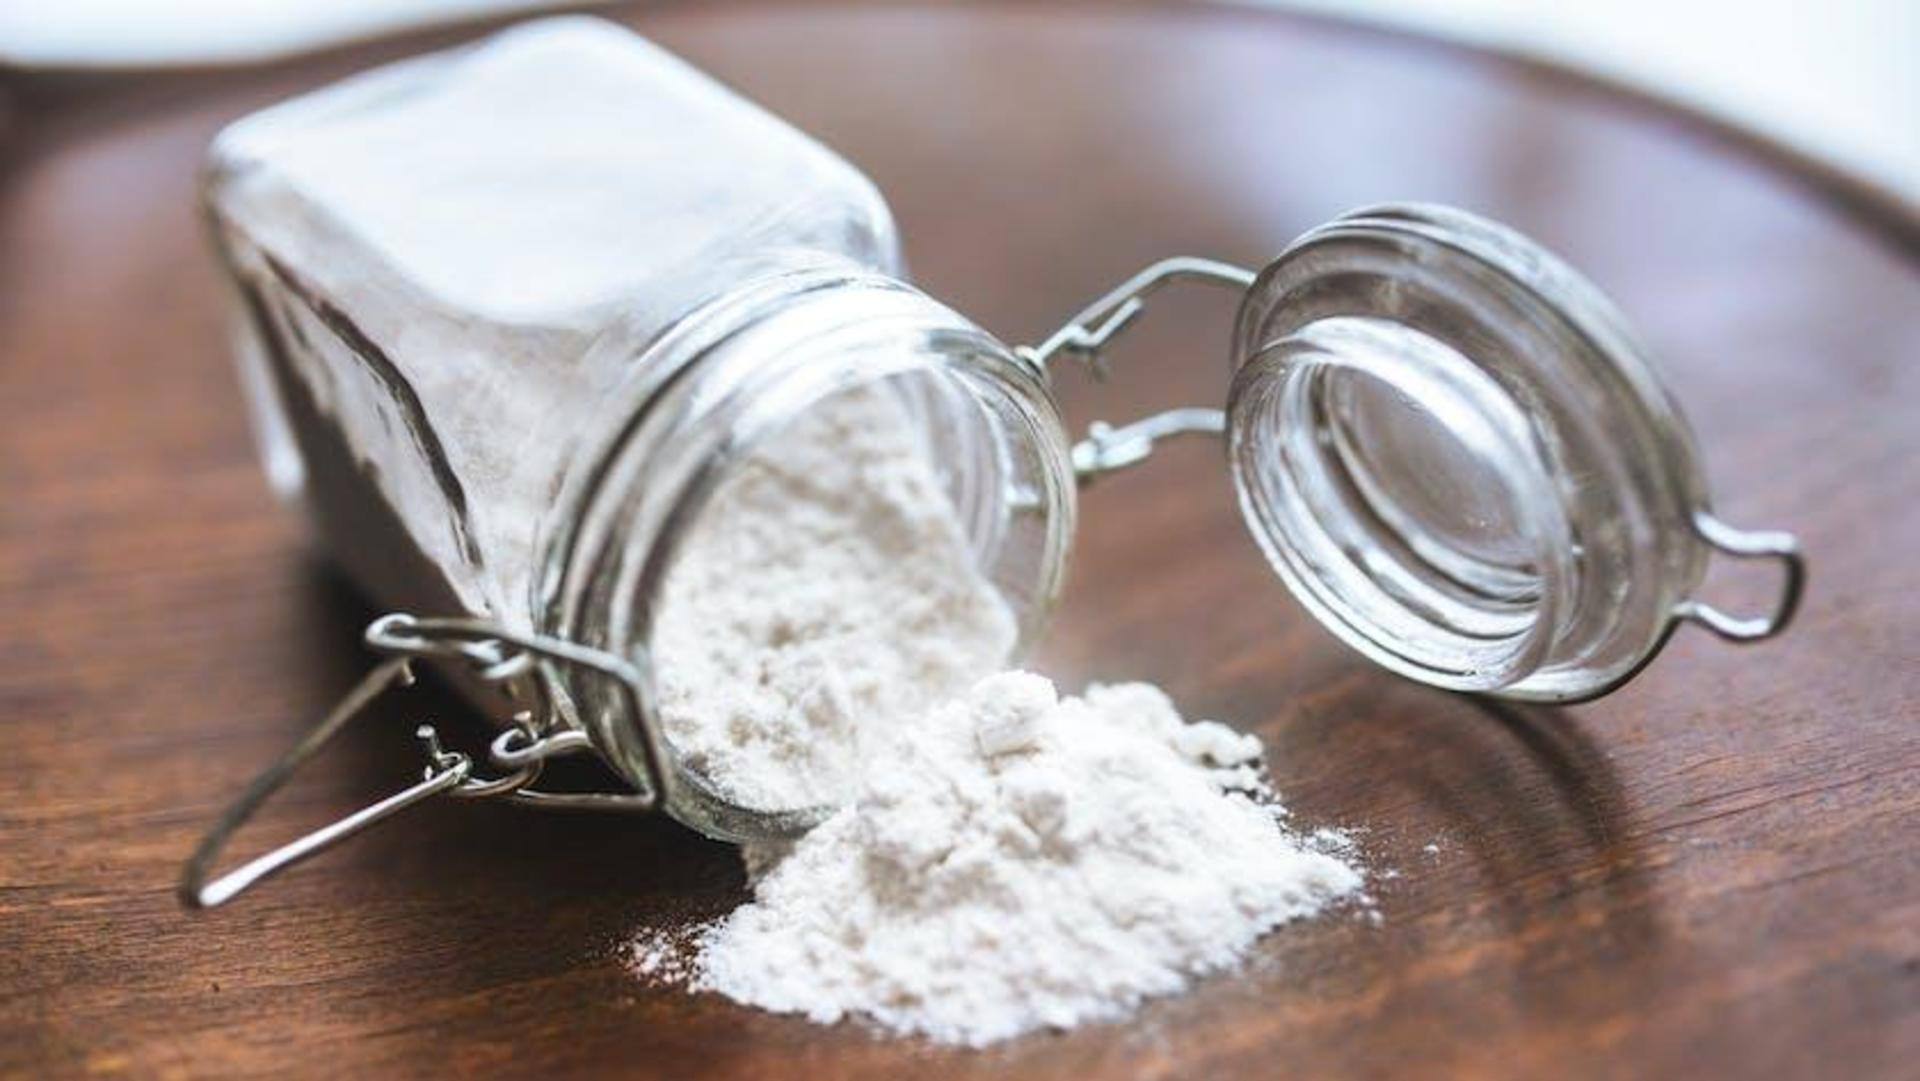 Here are five skincare uses of baking soda